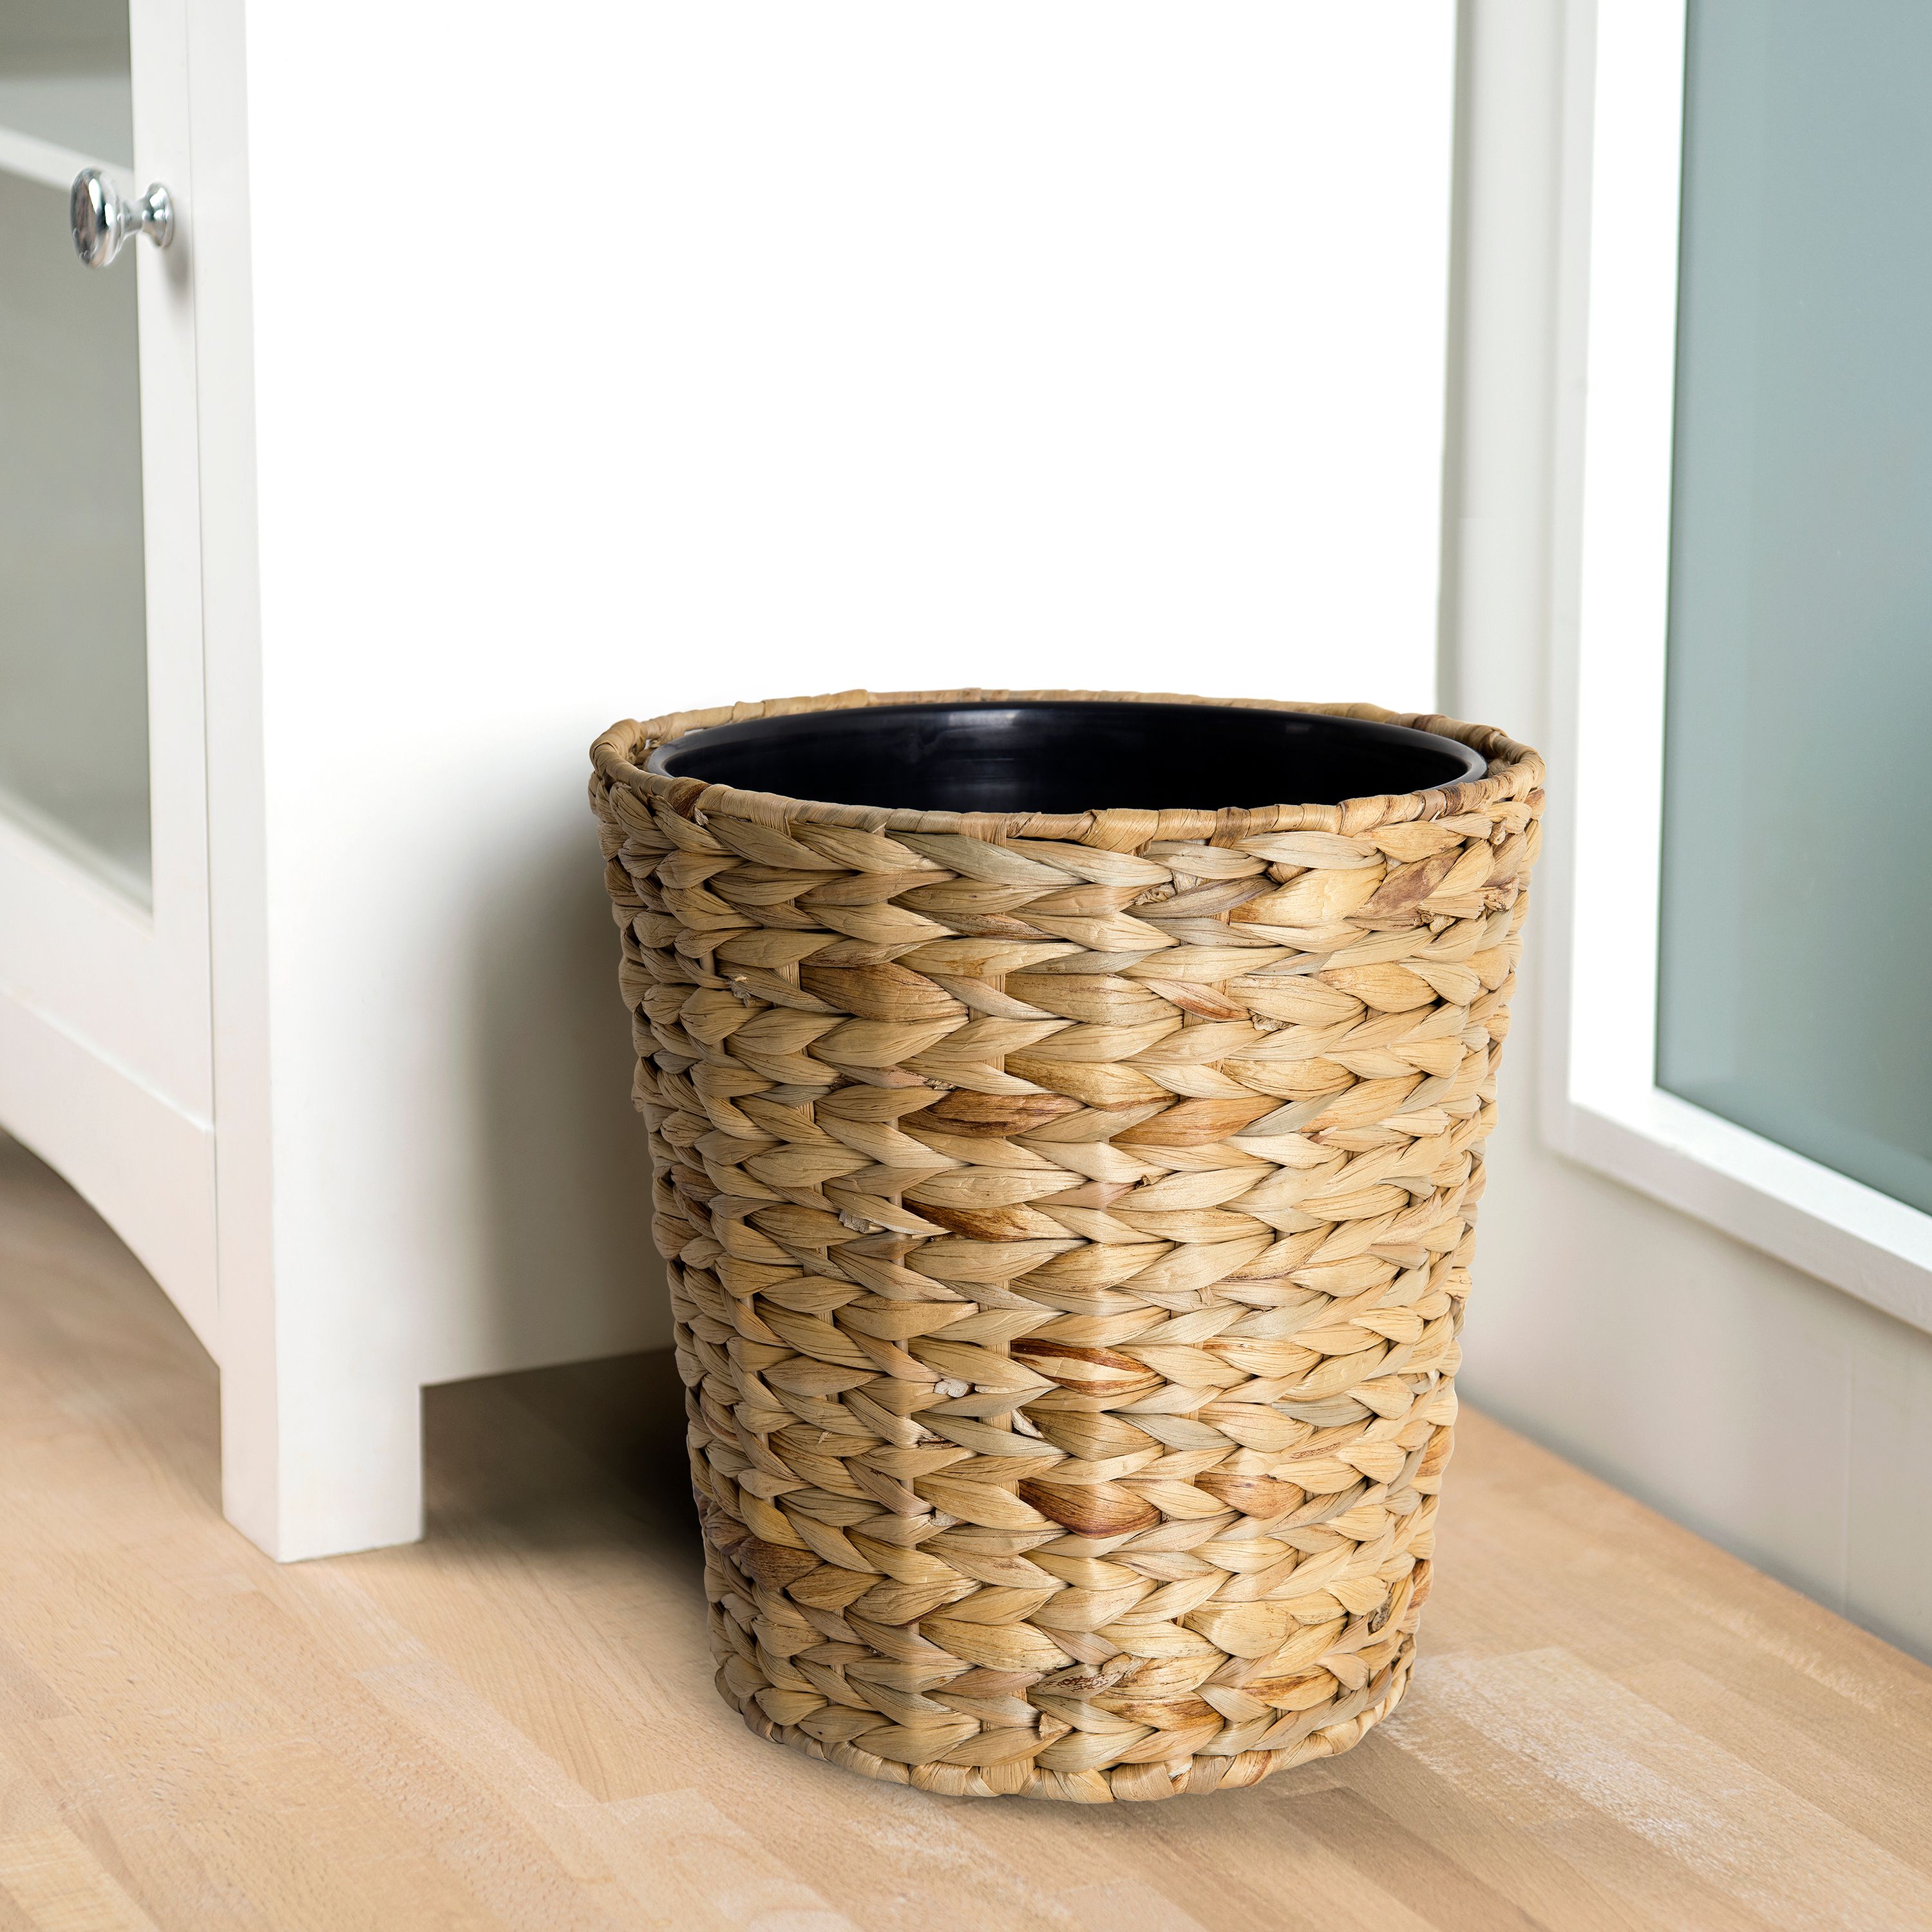 Better Home & Gardens Water Hyacinth 1.8 Gallon Wastebasket with Removable Liner, Natural - image 2 of 5